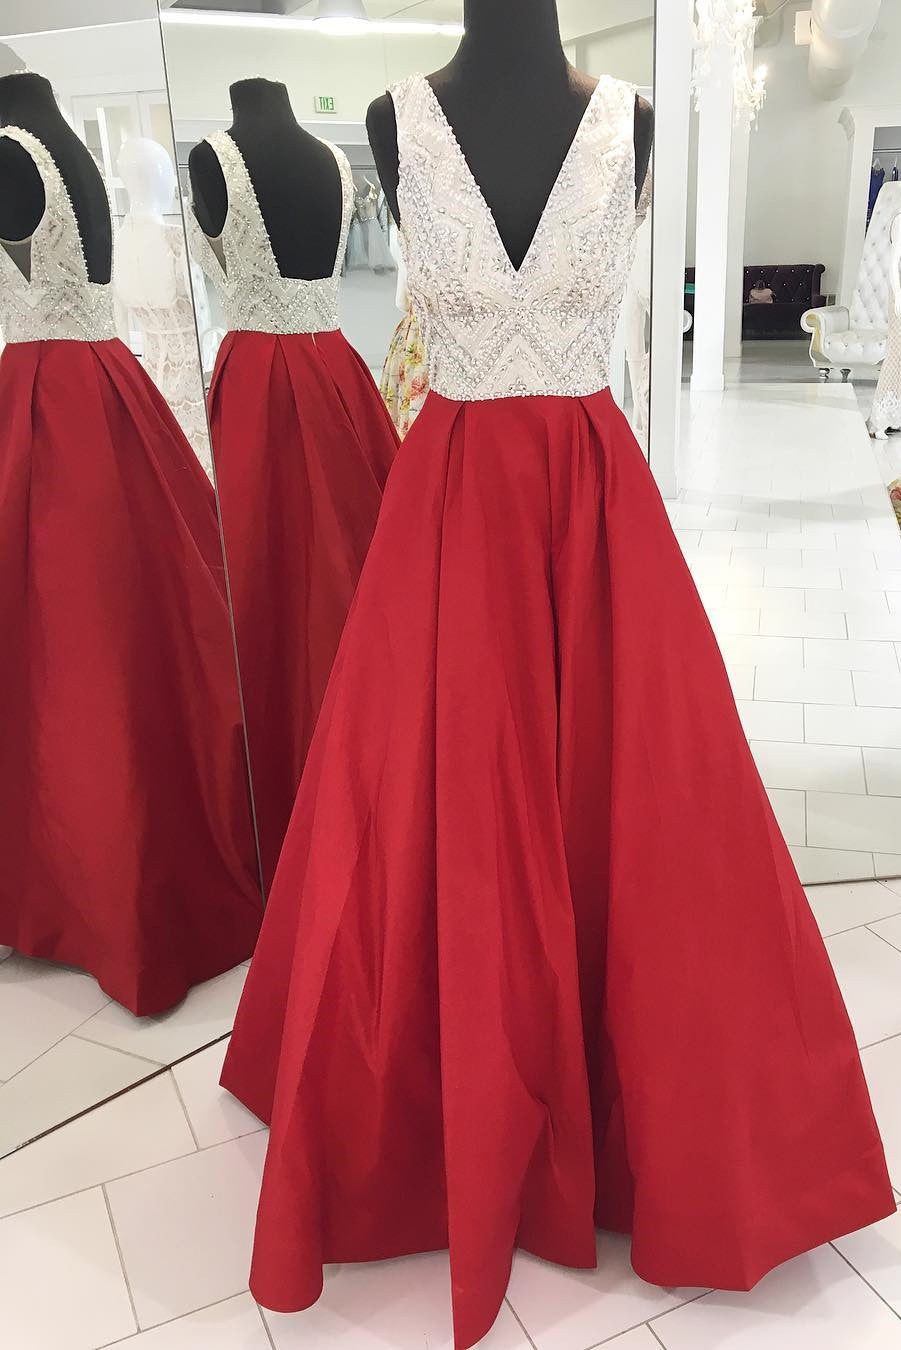 Red A line Prom Dress, Graduation School Party Gown, Winter Formal Dress